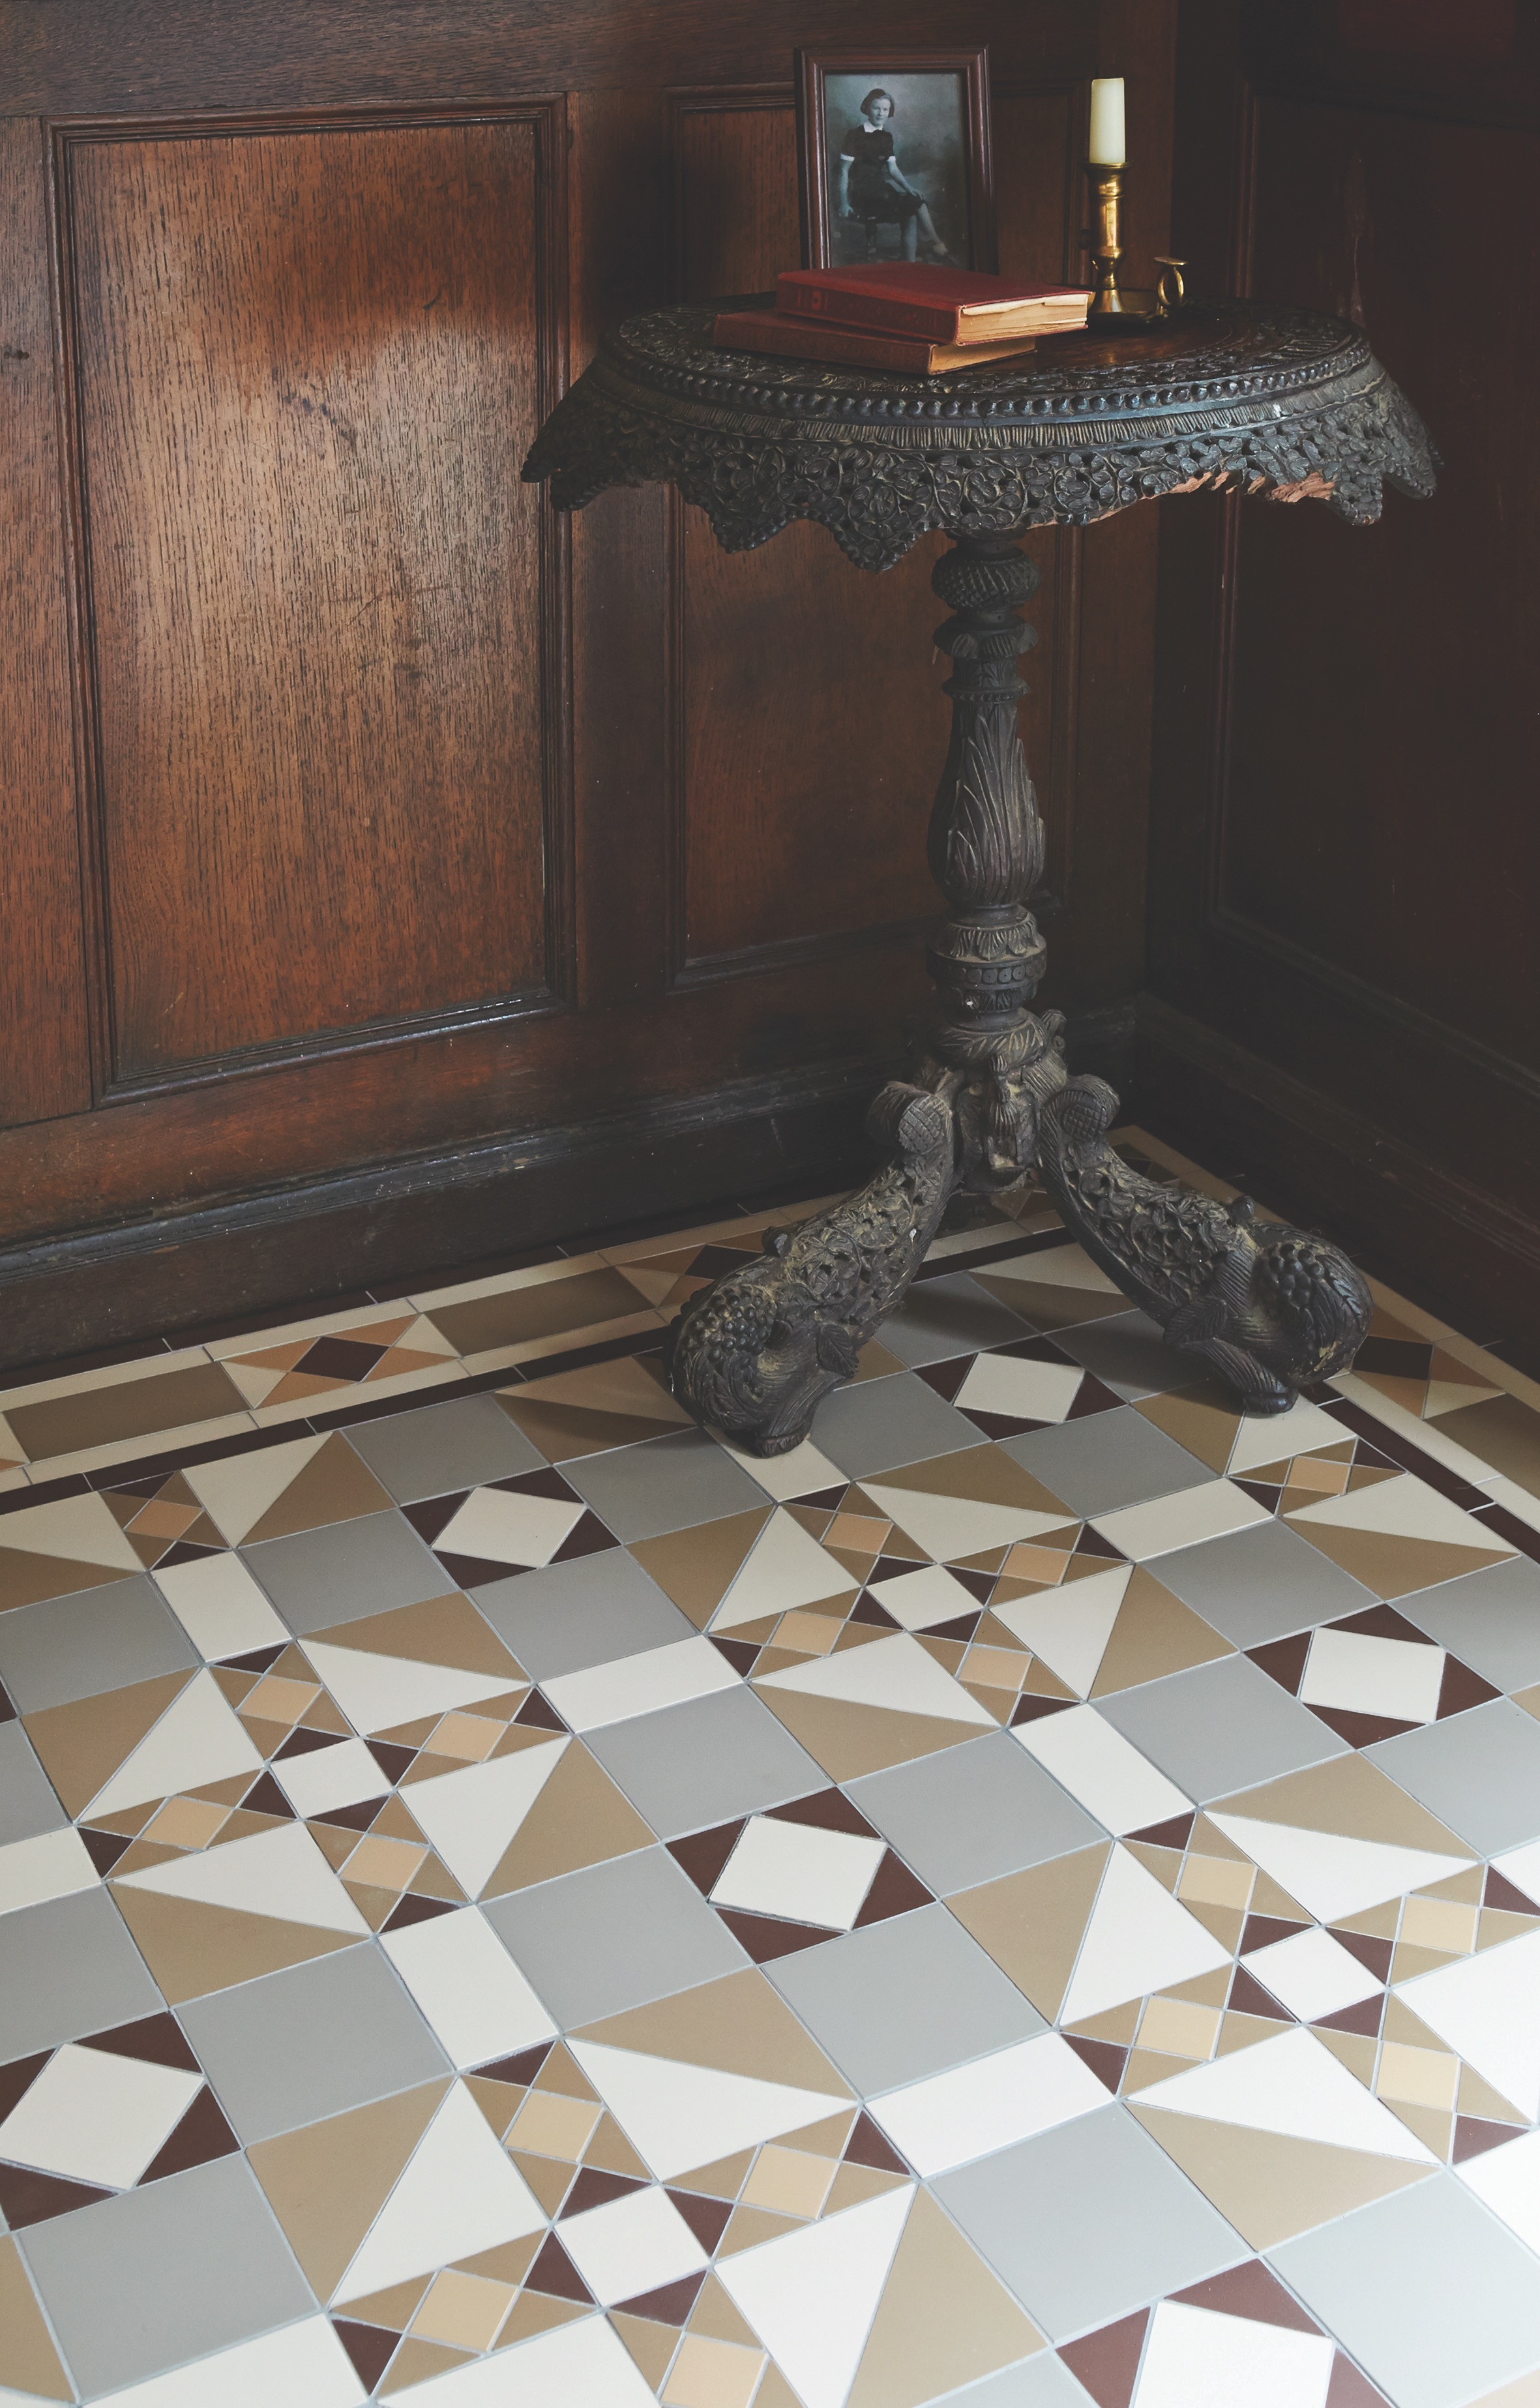 Original Style - VFT - Colchester pattern with Conrad border (modified) in Holkham Dune, Regency Bath, White, Brown, Old London 2.jpg